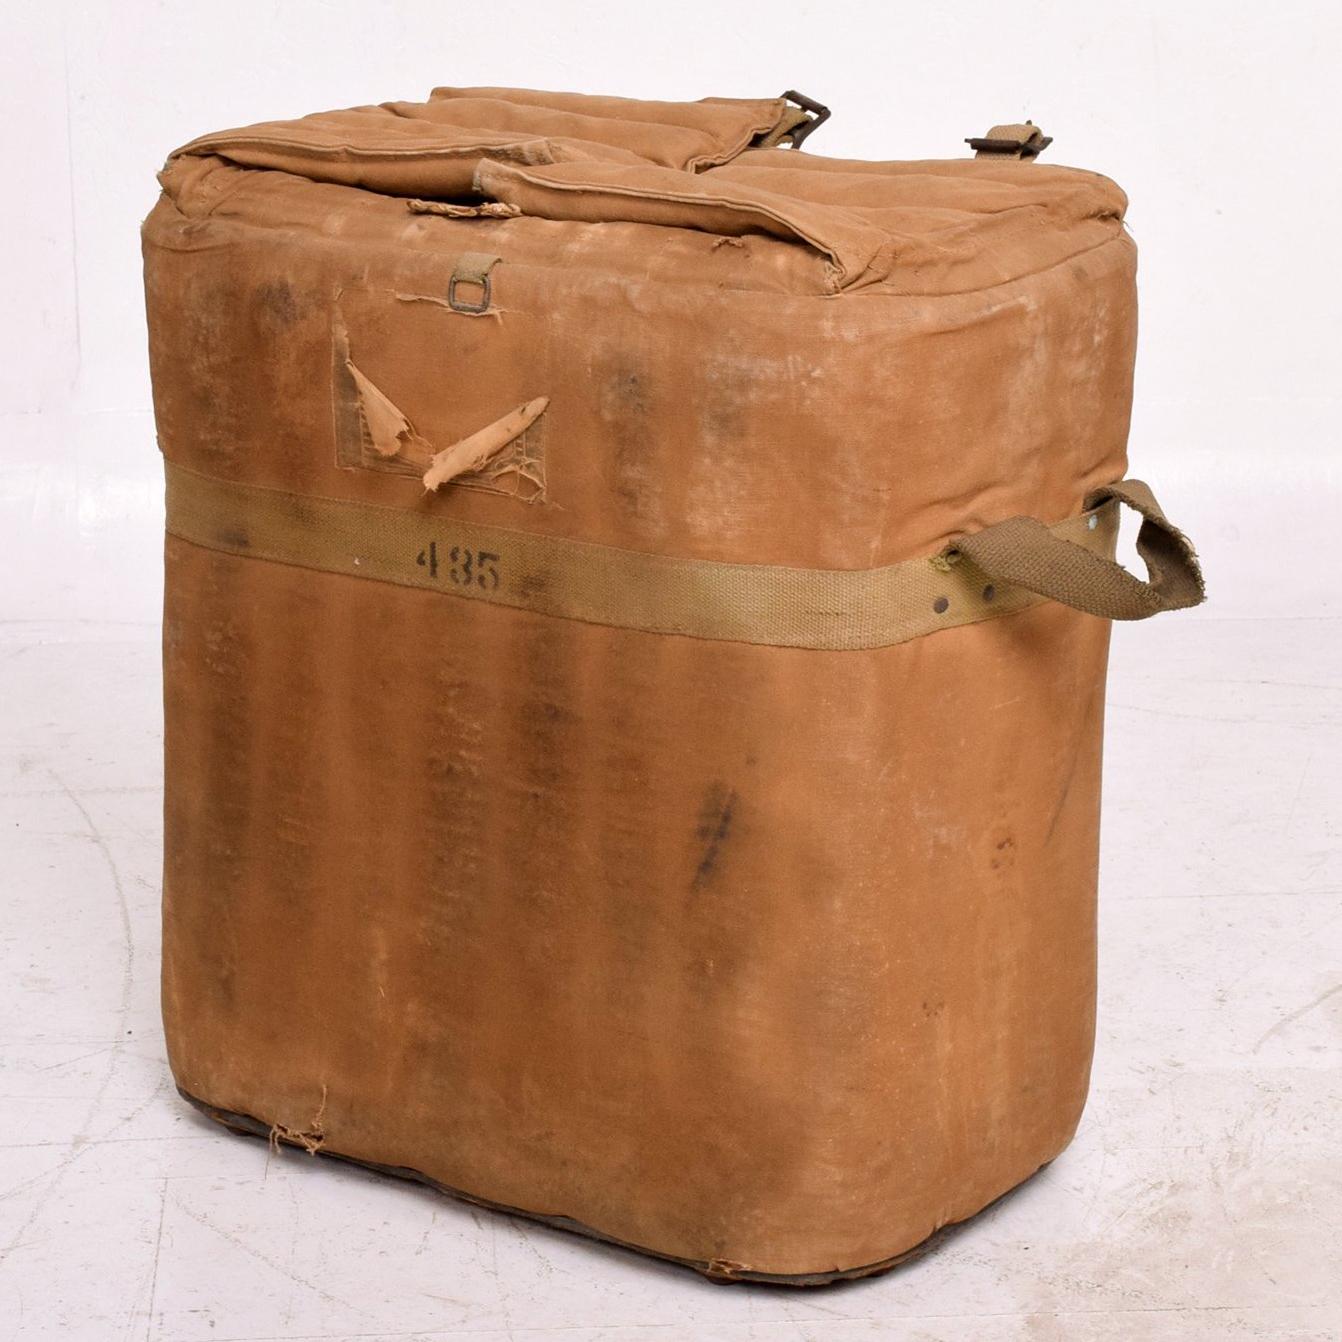 US vintage military surplus ice cooler chest designed in metal, canvas, cotton and leather presents in original distressed condition. circa 1940s.
Fabulous industrial prop has tons of character.
Functions as an ice chest tote or ideal as a catch